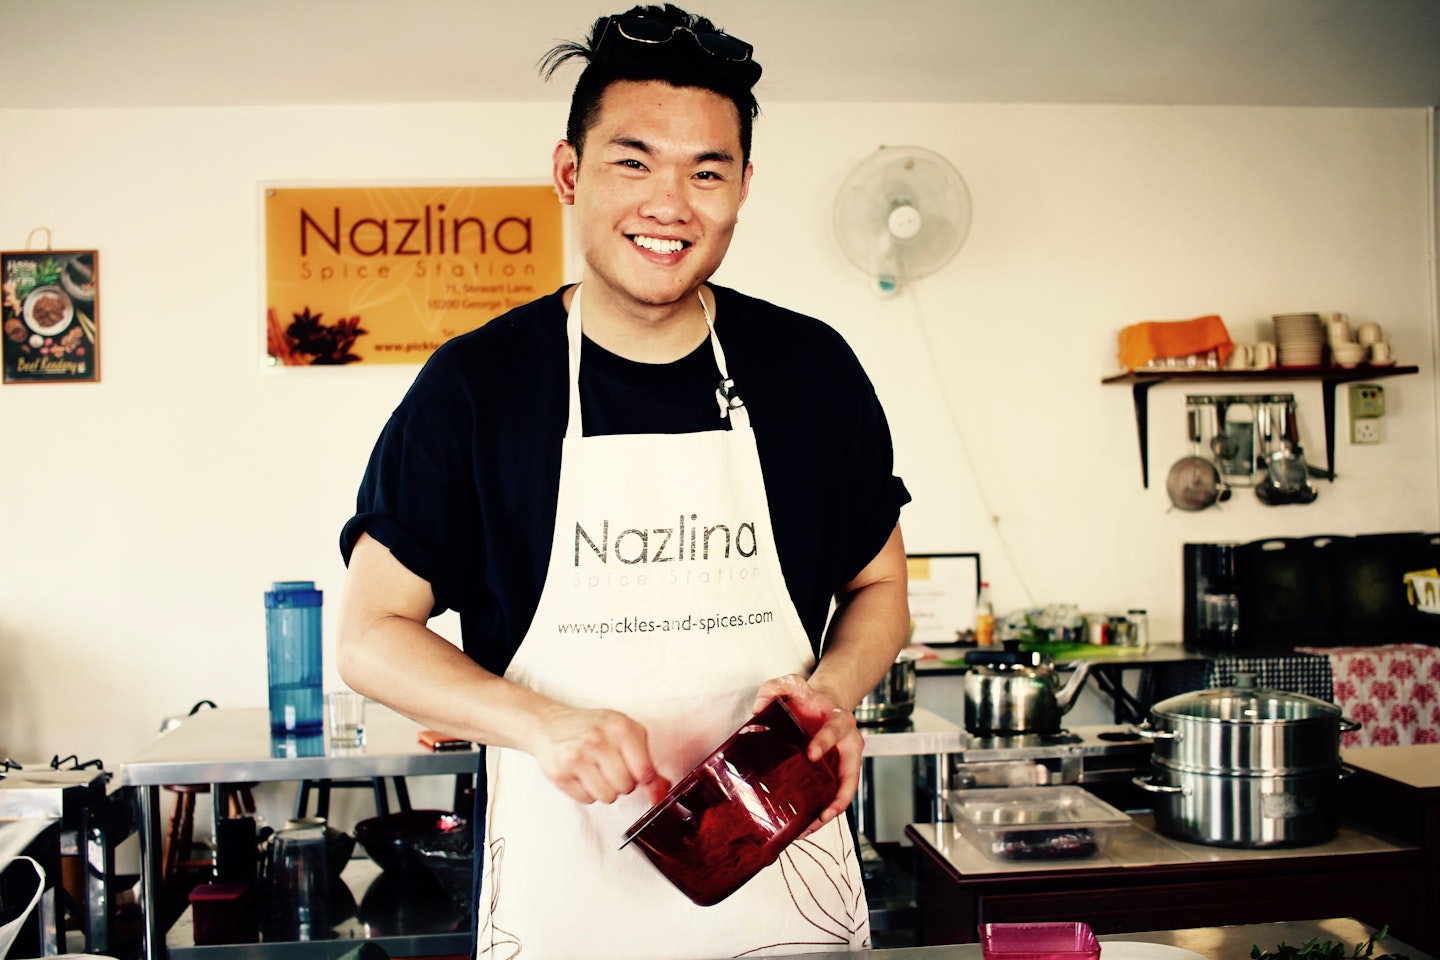 Ethan during his vacation with chef Nazlina in Penang, Malaysia. Courtesy of Ethan Hsu.